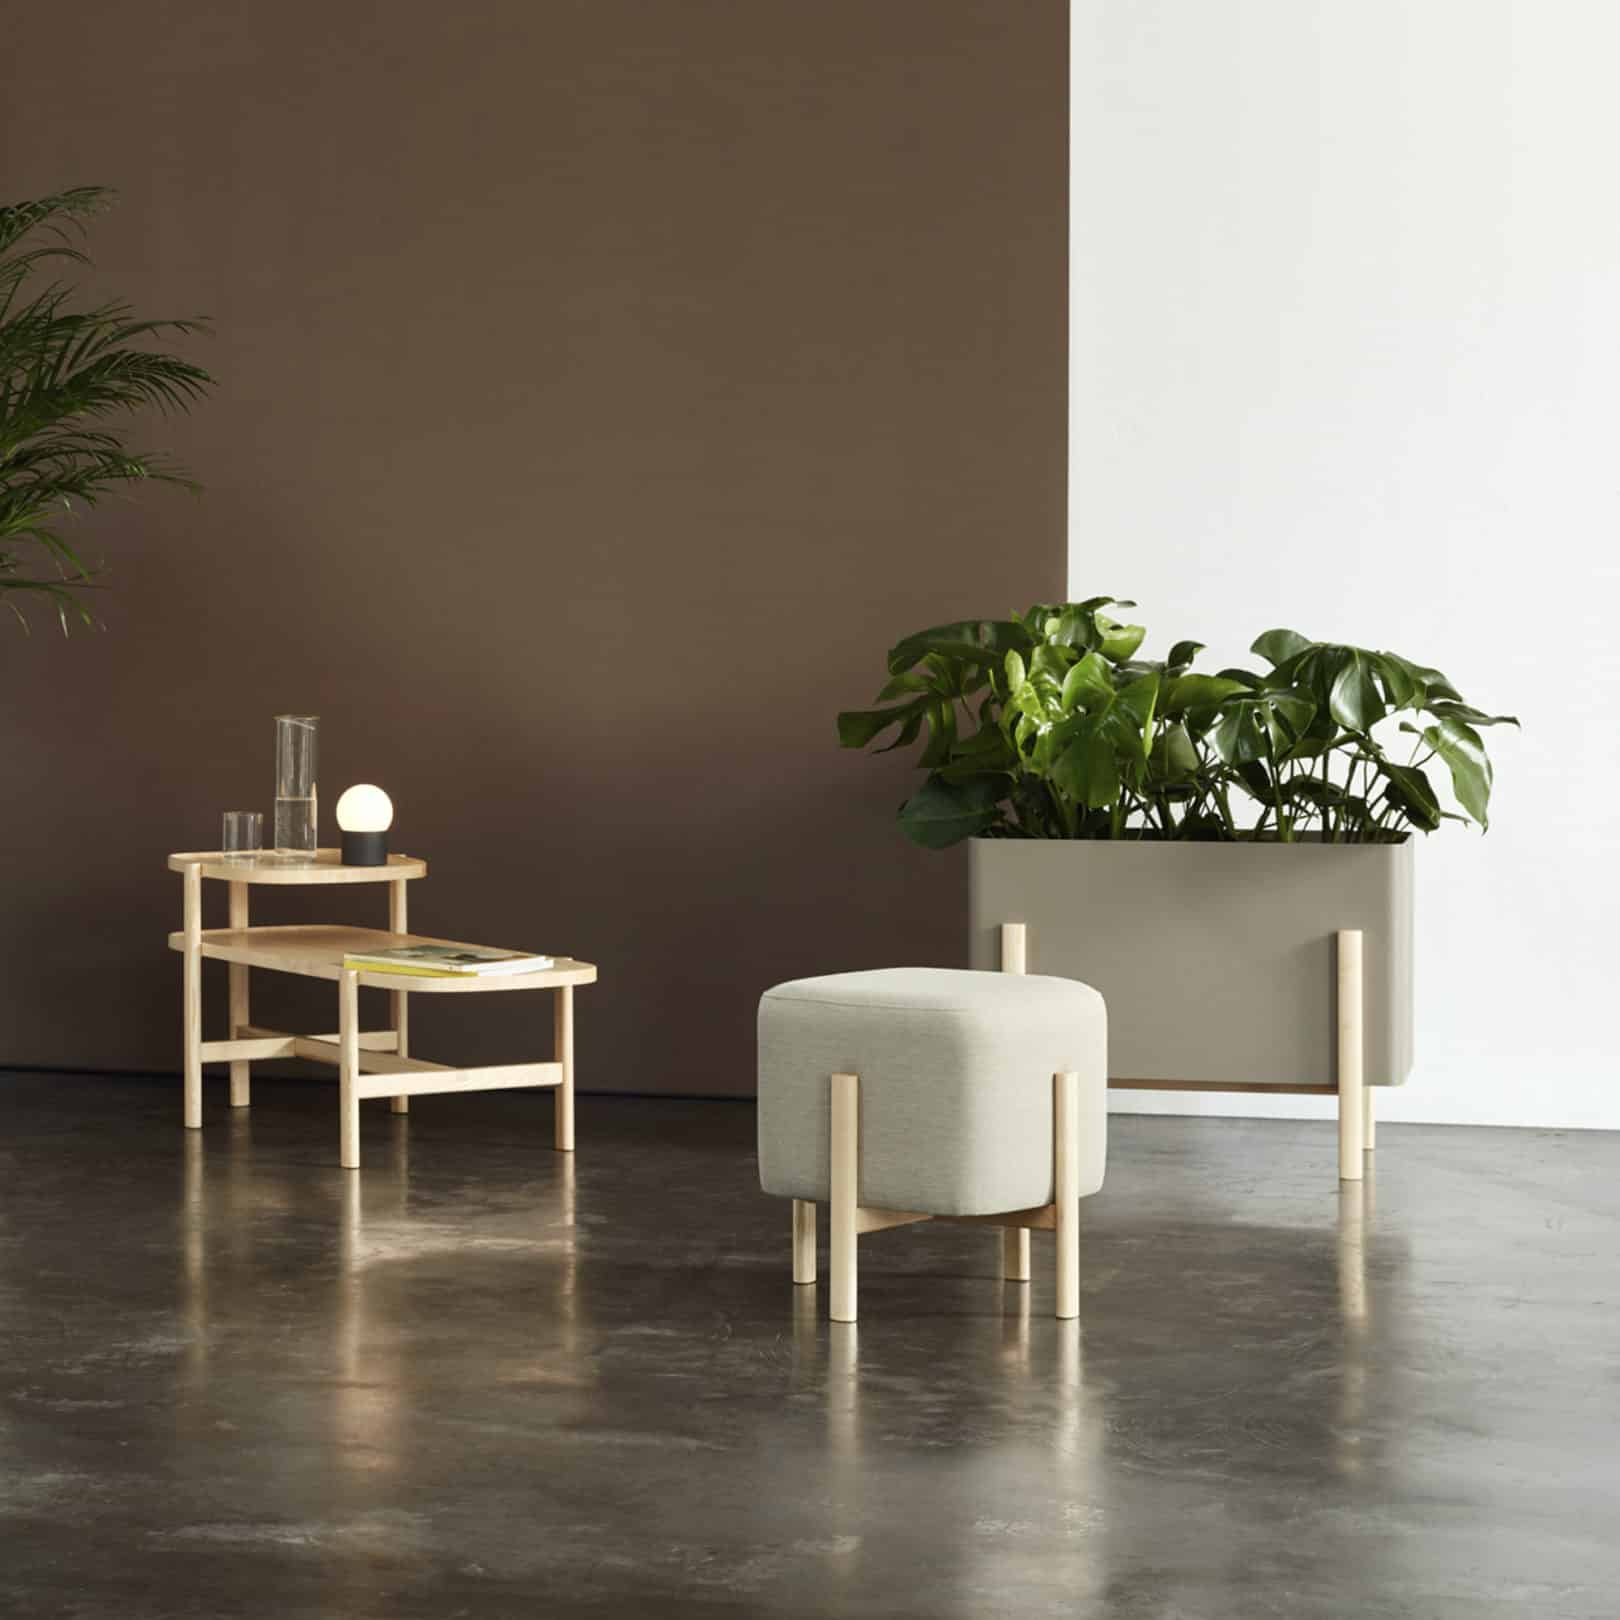 Fuse seat with long table and rectangular planter